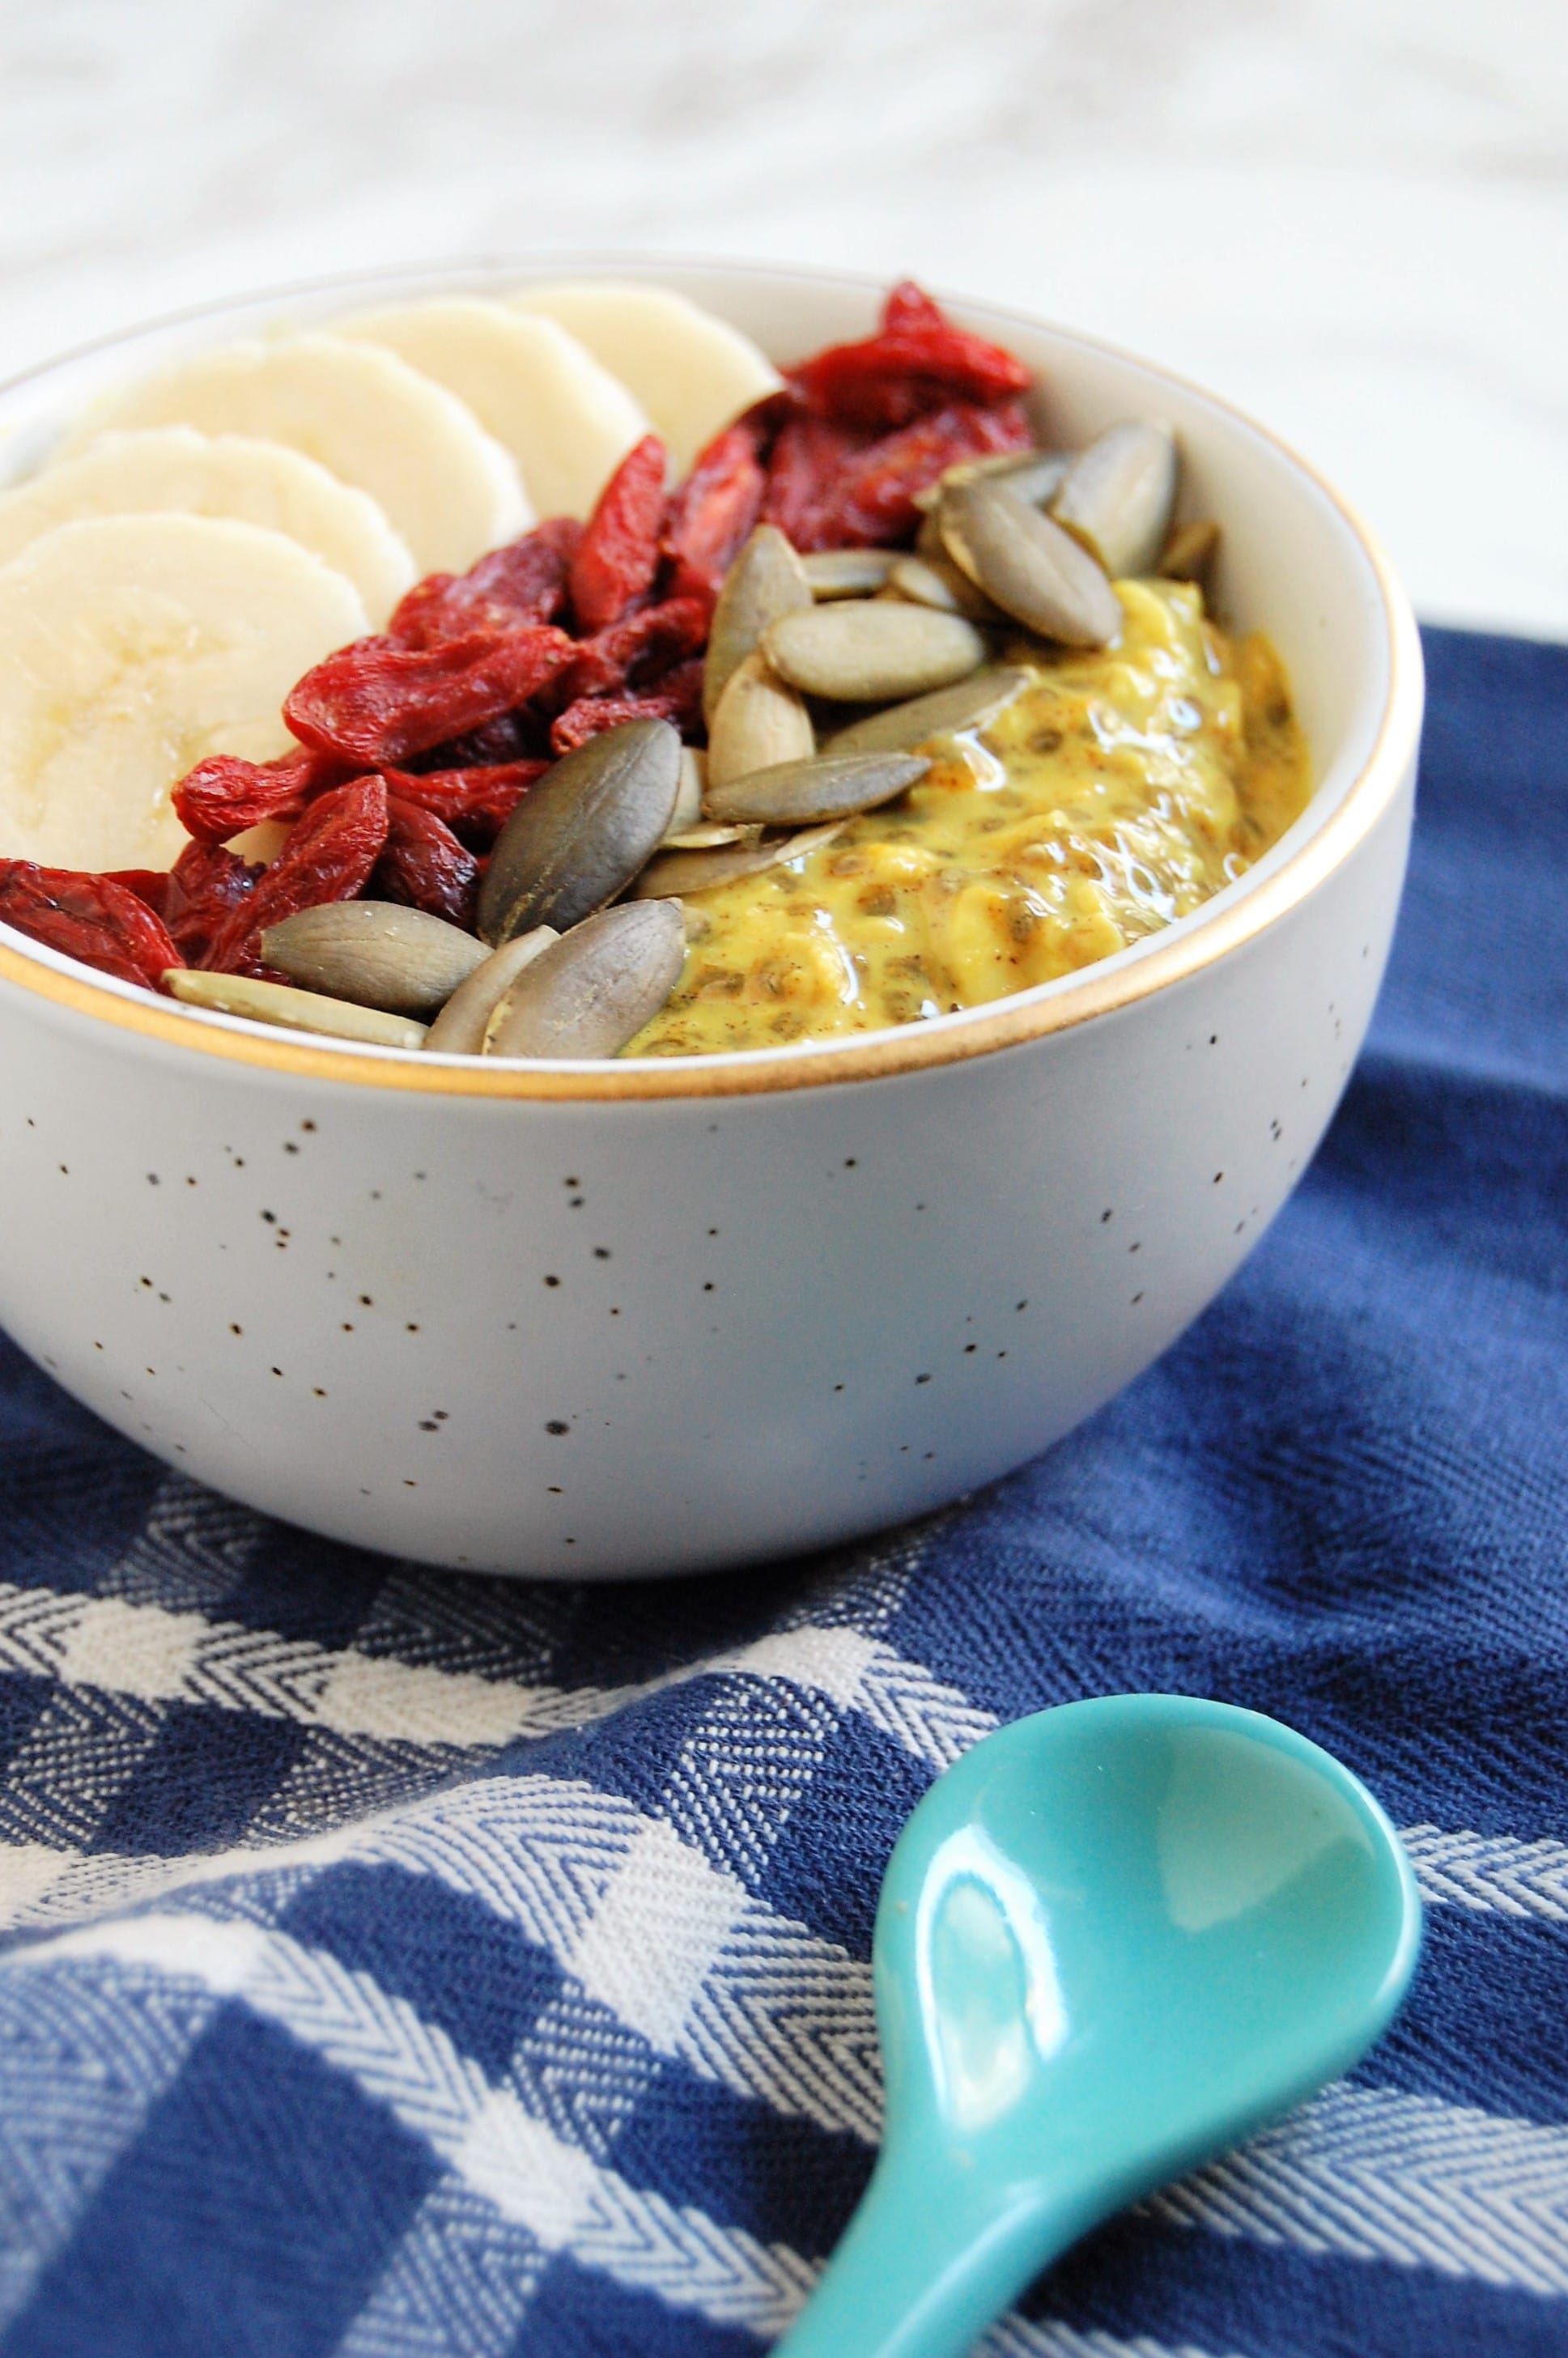 Spiced Turmeric Overnight Oats is an easy recipe that makes for a delicious grab-and-go breakfast that is vegan and packed with plant-based protein and fiber. Bonus? It's dairy-free, nut-free, and gluten-free so you can still enjoy a delicious anti-inflammatory breakfast no matter how you eat!